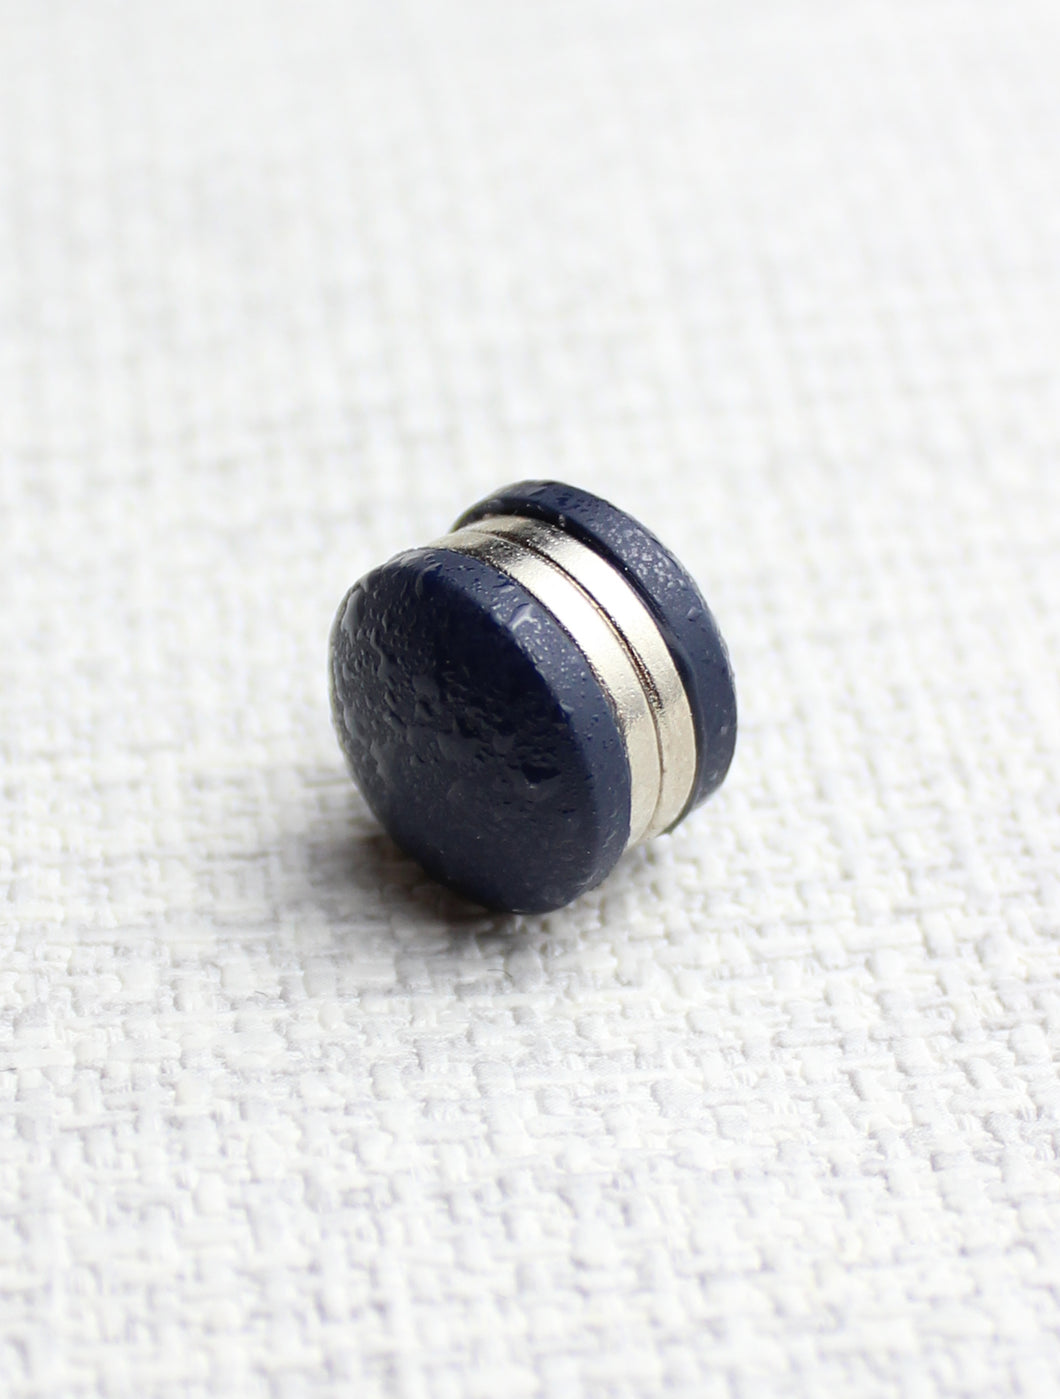 Navy Droplets Magnetic Pin